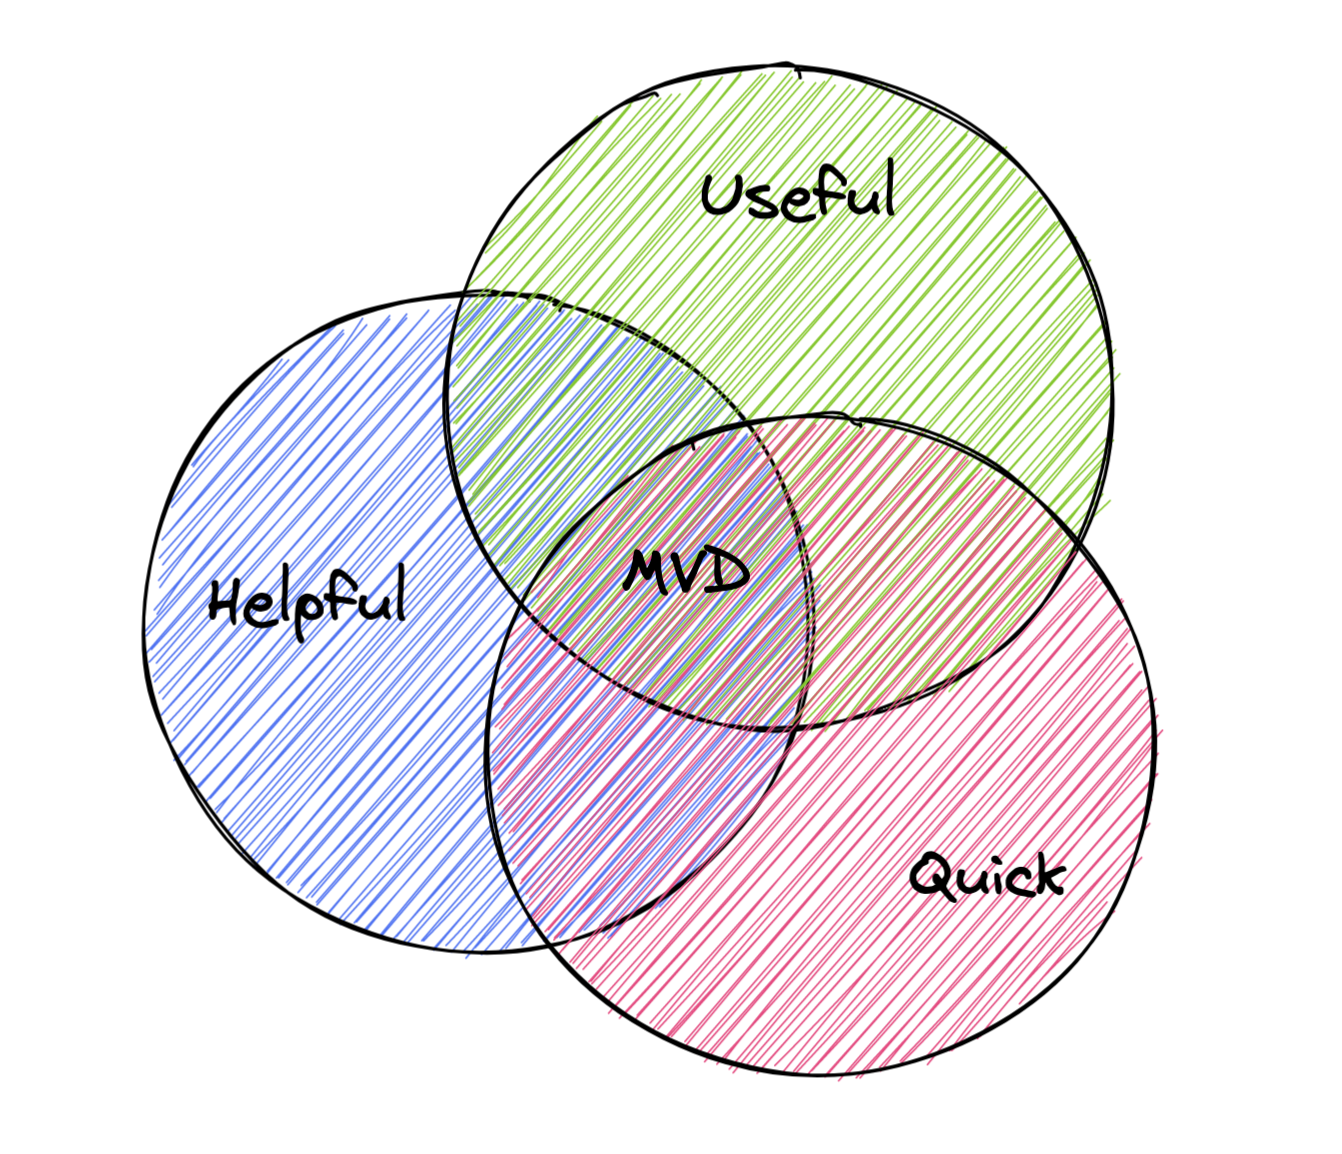 Venn diagram with overlapping circles of Helpful, Useful, and Quick intersecting to form MVD.